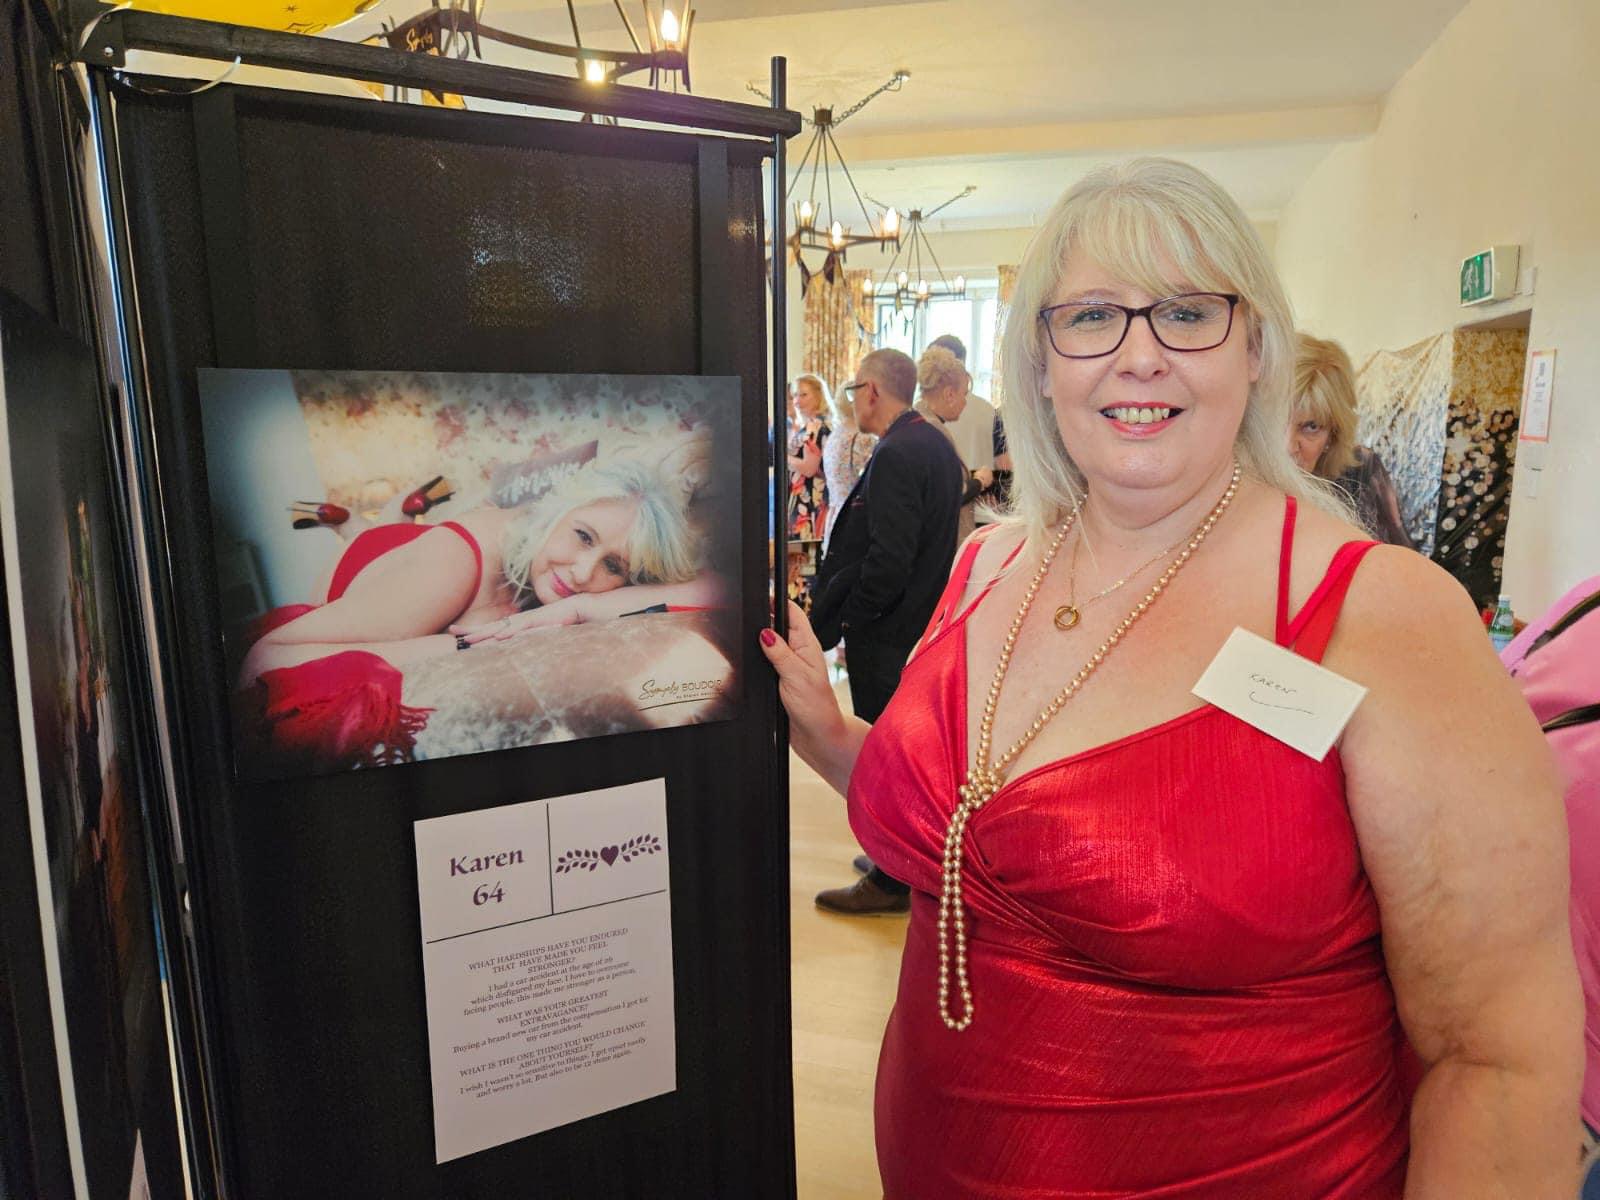 boudoir exhibition raising funds for breast cancer